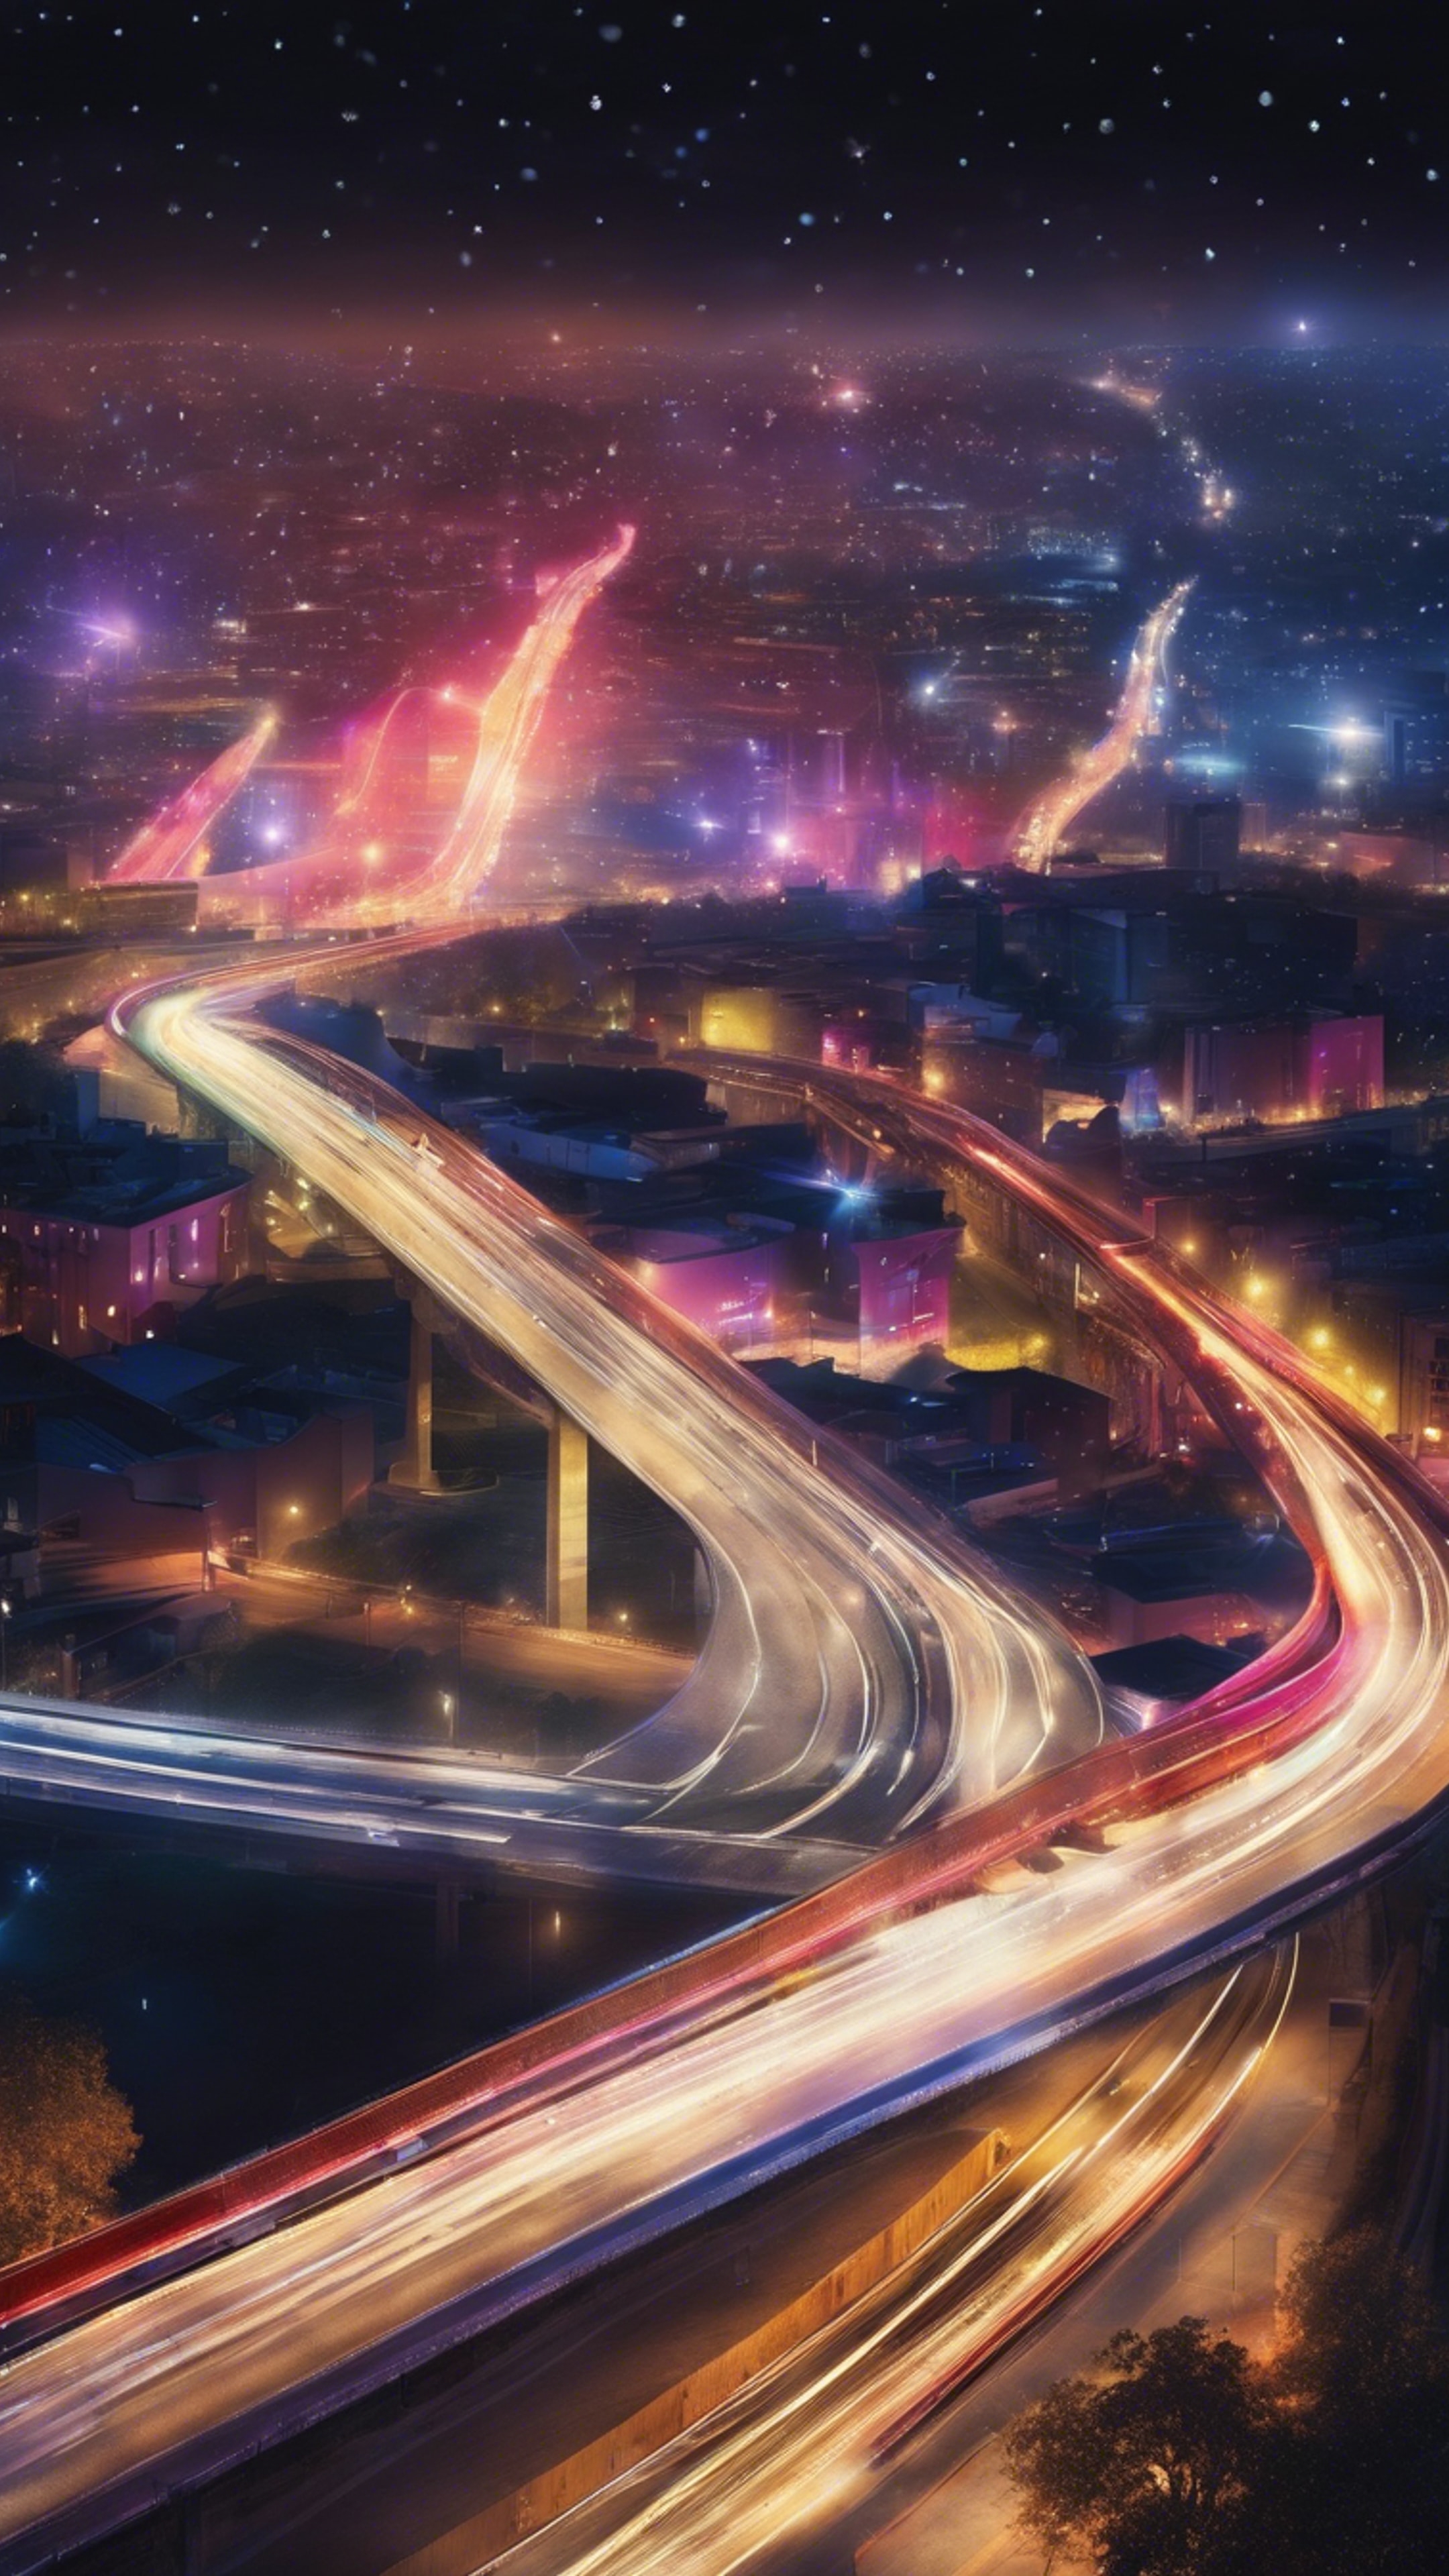 A lustrous highway painting a ribbon of light through the city under the vivid colors of a nocturnal sky. 벽지[7f6125f7f59b411d957d]